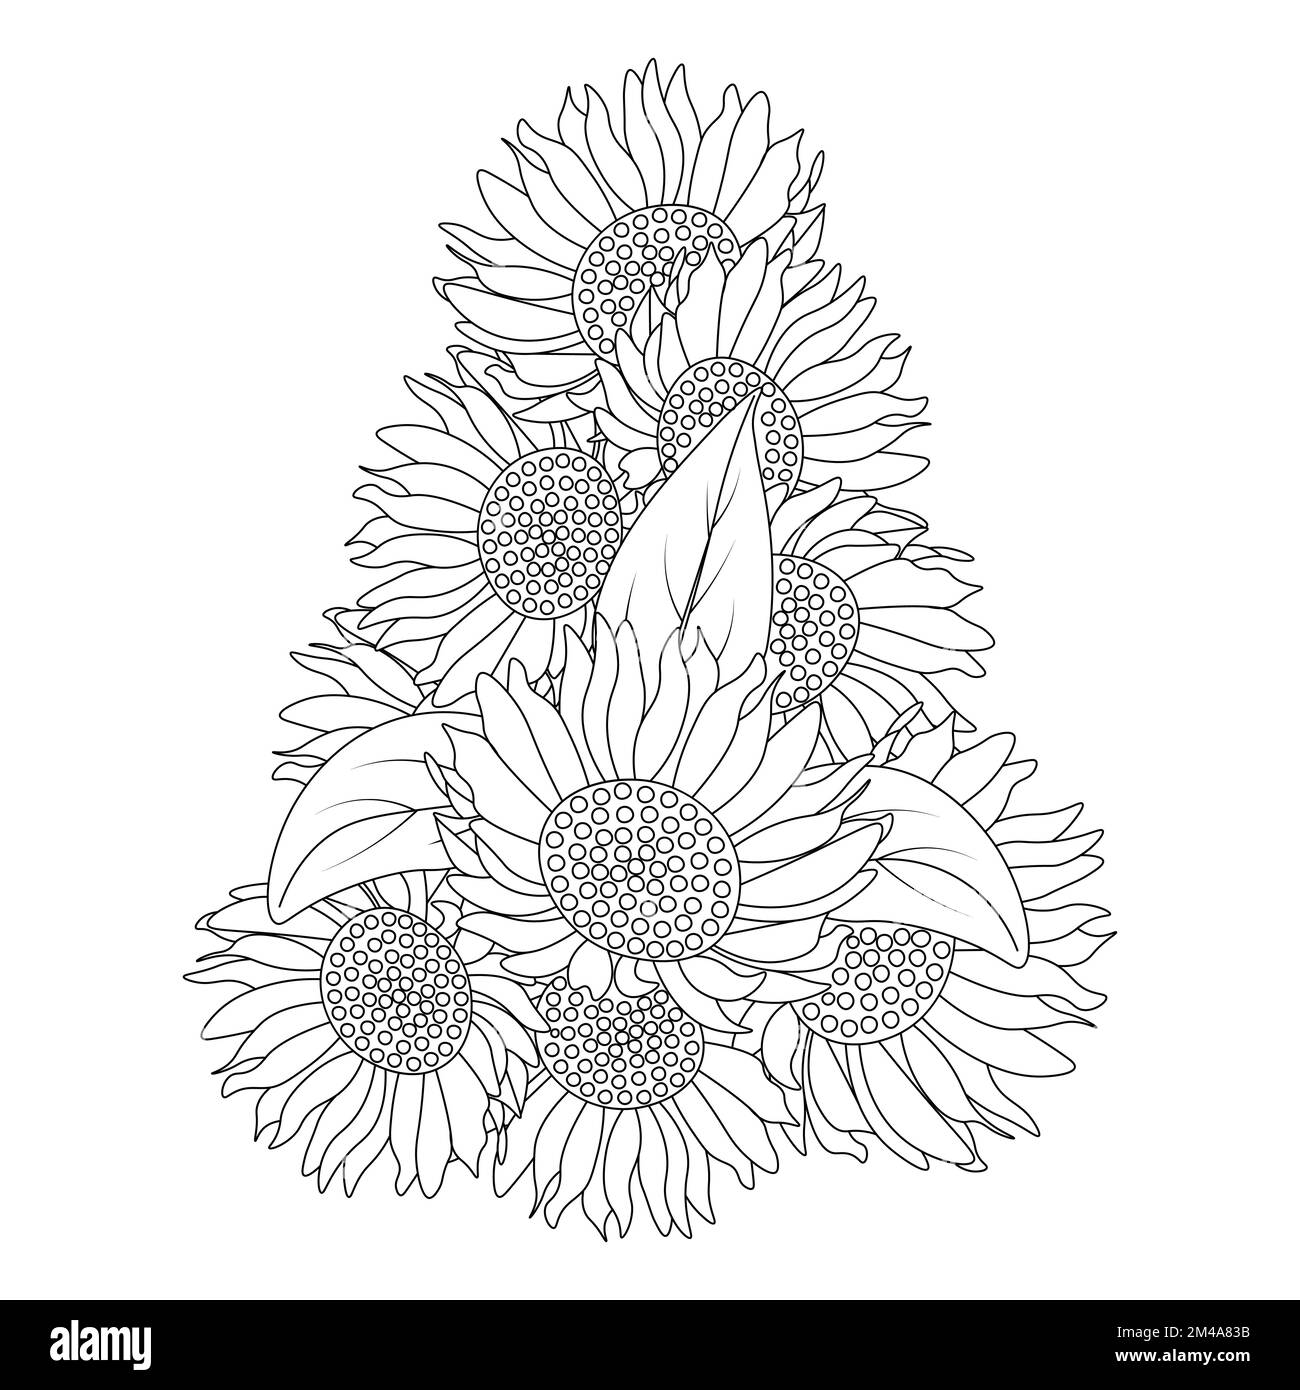 sunflower zen doodle art drawing of vector design with blooming petal adult coloring book page Stock Vector